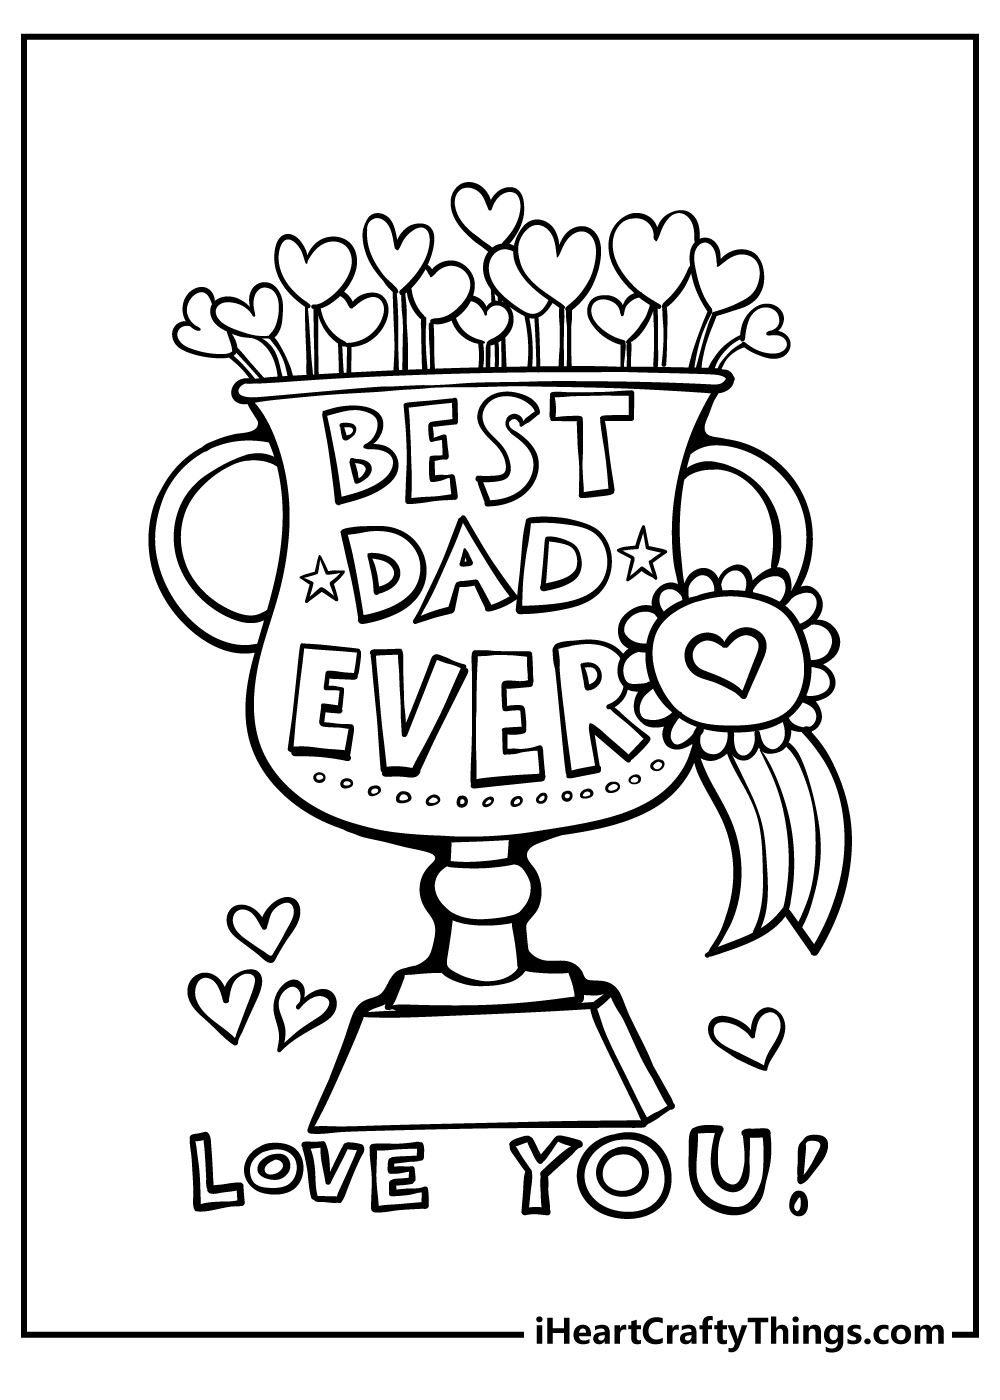 Printable Coloring Fathers Day Cards